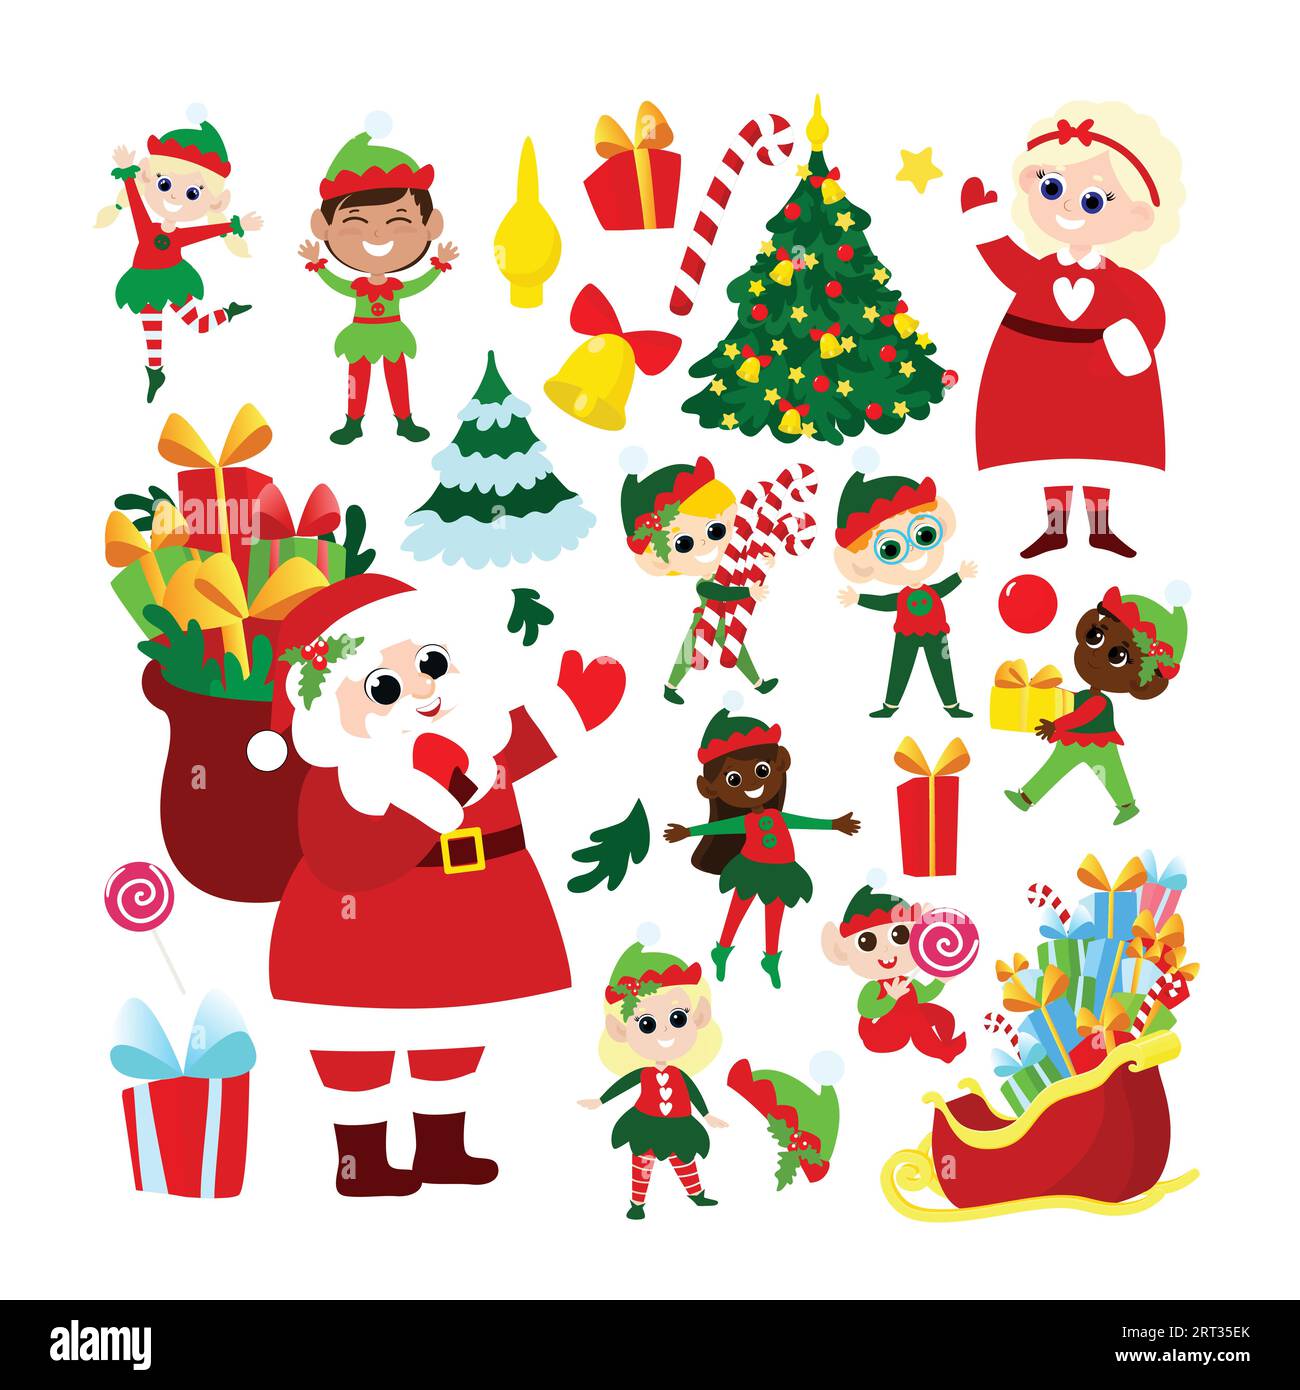 Set of Santa Claus, Mrs. Santa Claus, elves, Christmas trees and lollipops in cartoon style isolated on white background. Cute and positive Christmas Stock Vector